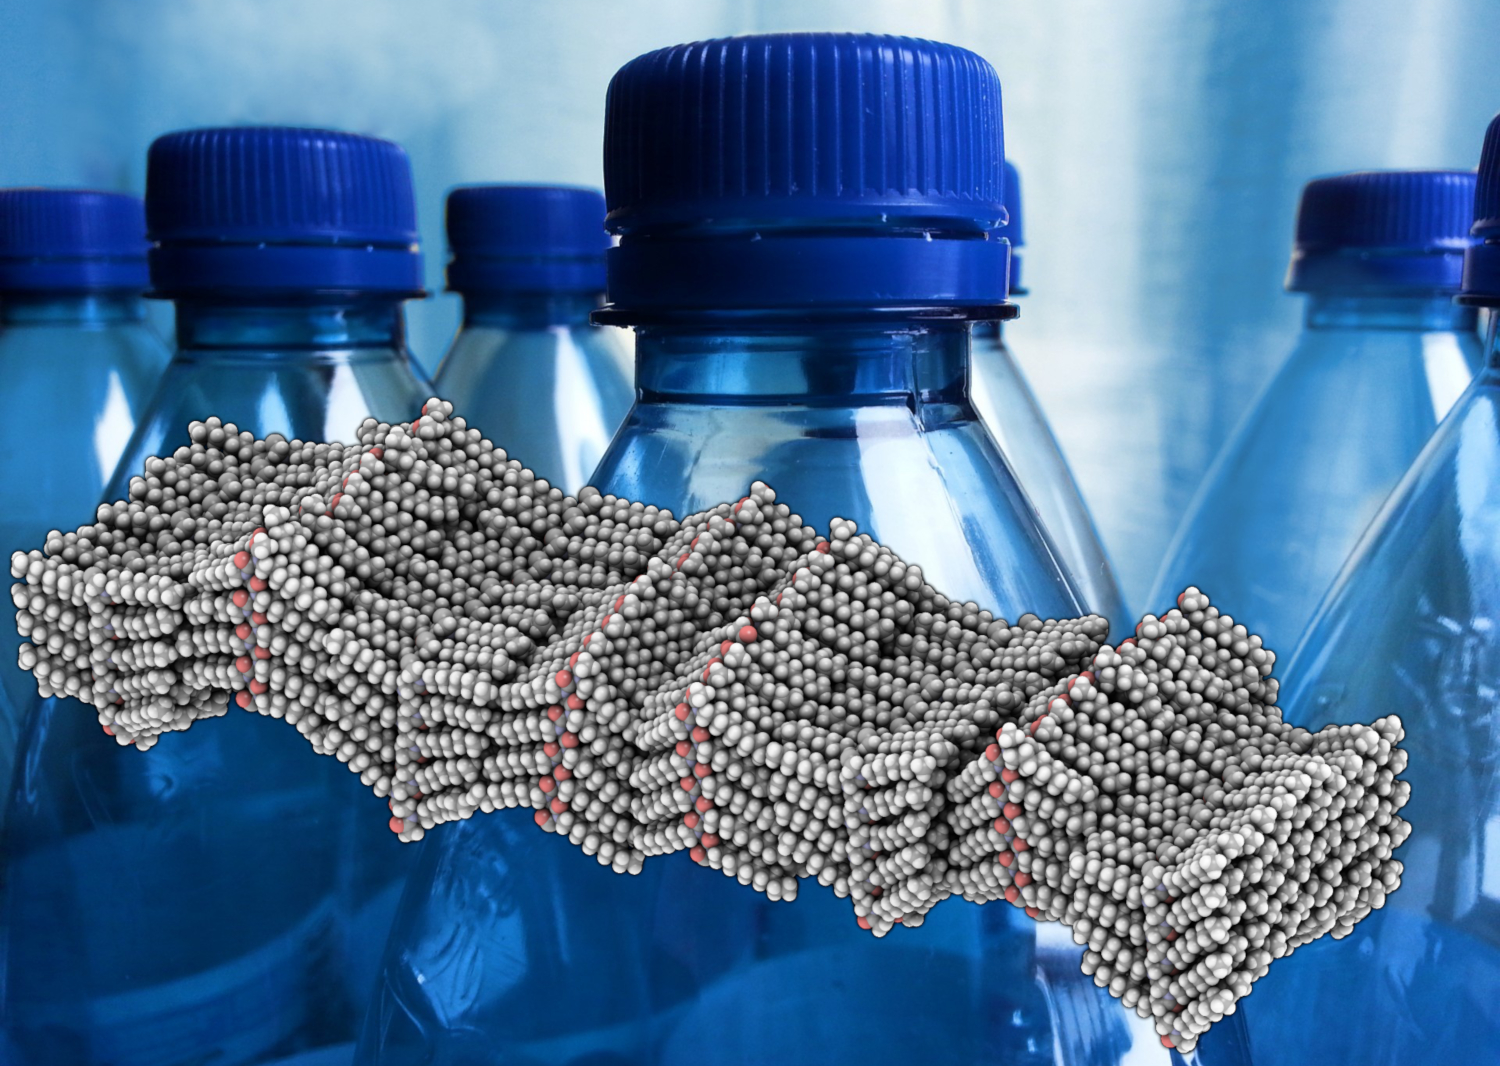 Image - Rendering of the molecular structure of a peptoid polymer that was studied by a team led by Berkeley Lab and UC Berkeley. The team's success in imaging the atomic-scale structure of polymers could help inform the designs of plastics, like those in the water bottles shown here. (Credit: Berkeley Lab, Charles Rondeau/PublicDomainPictures.net)